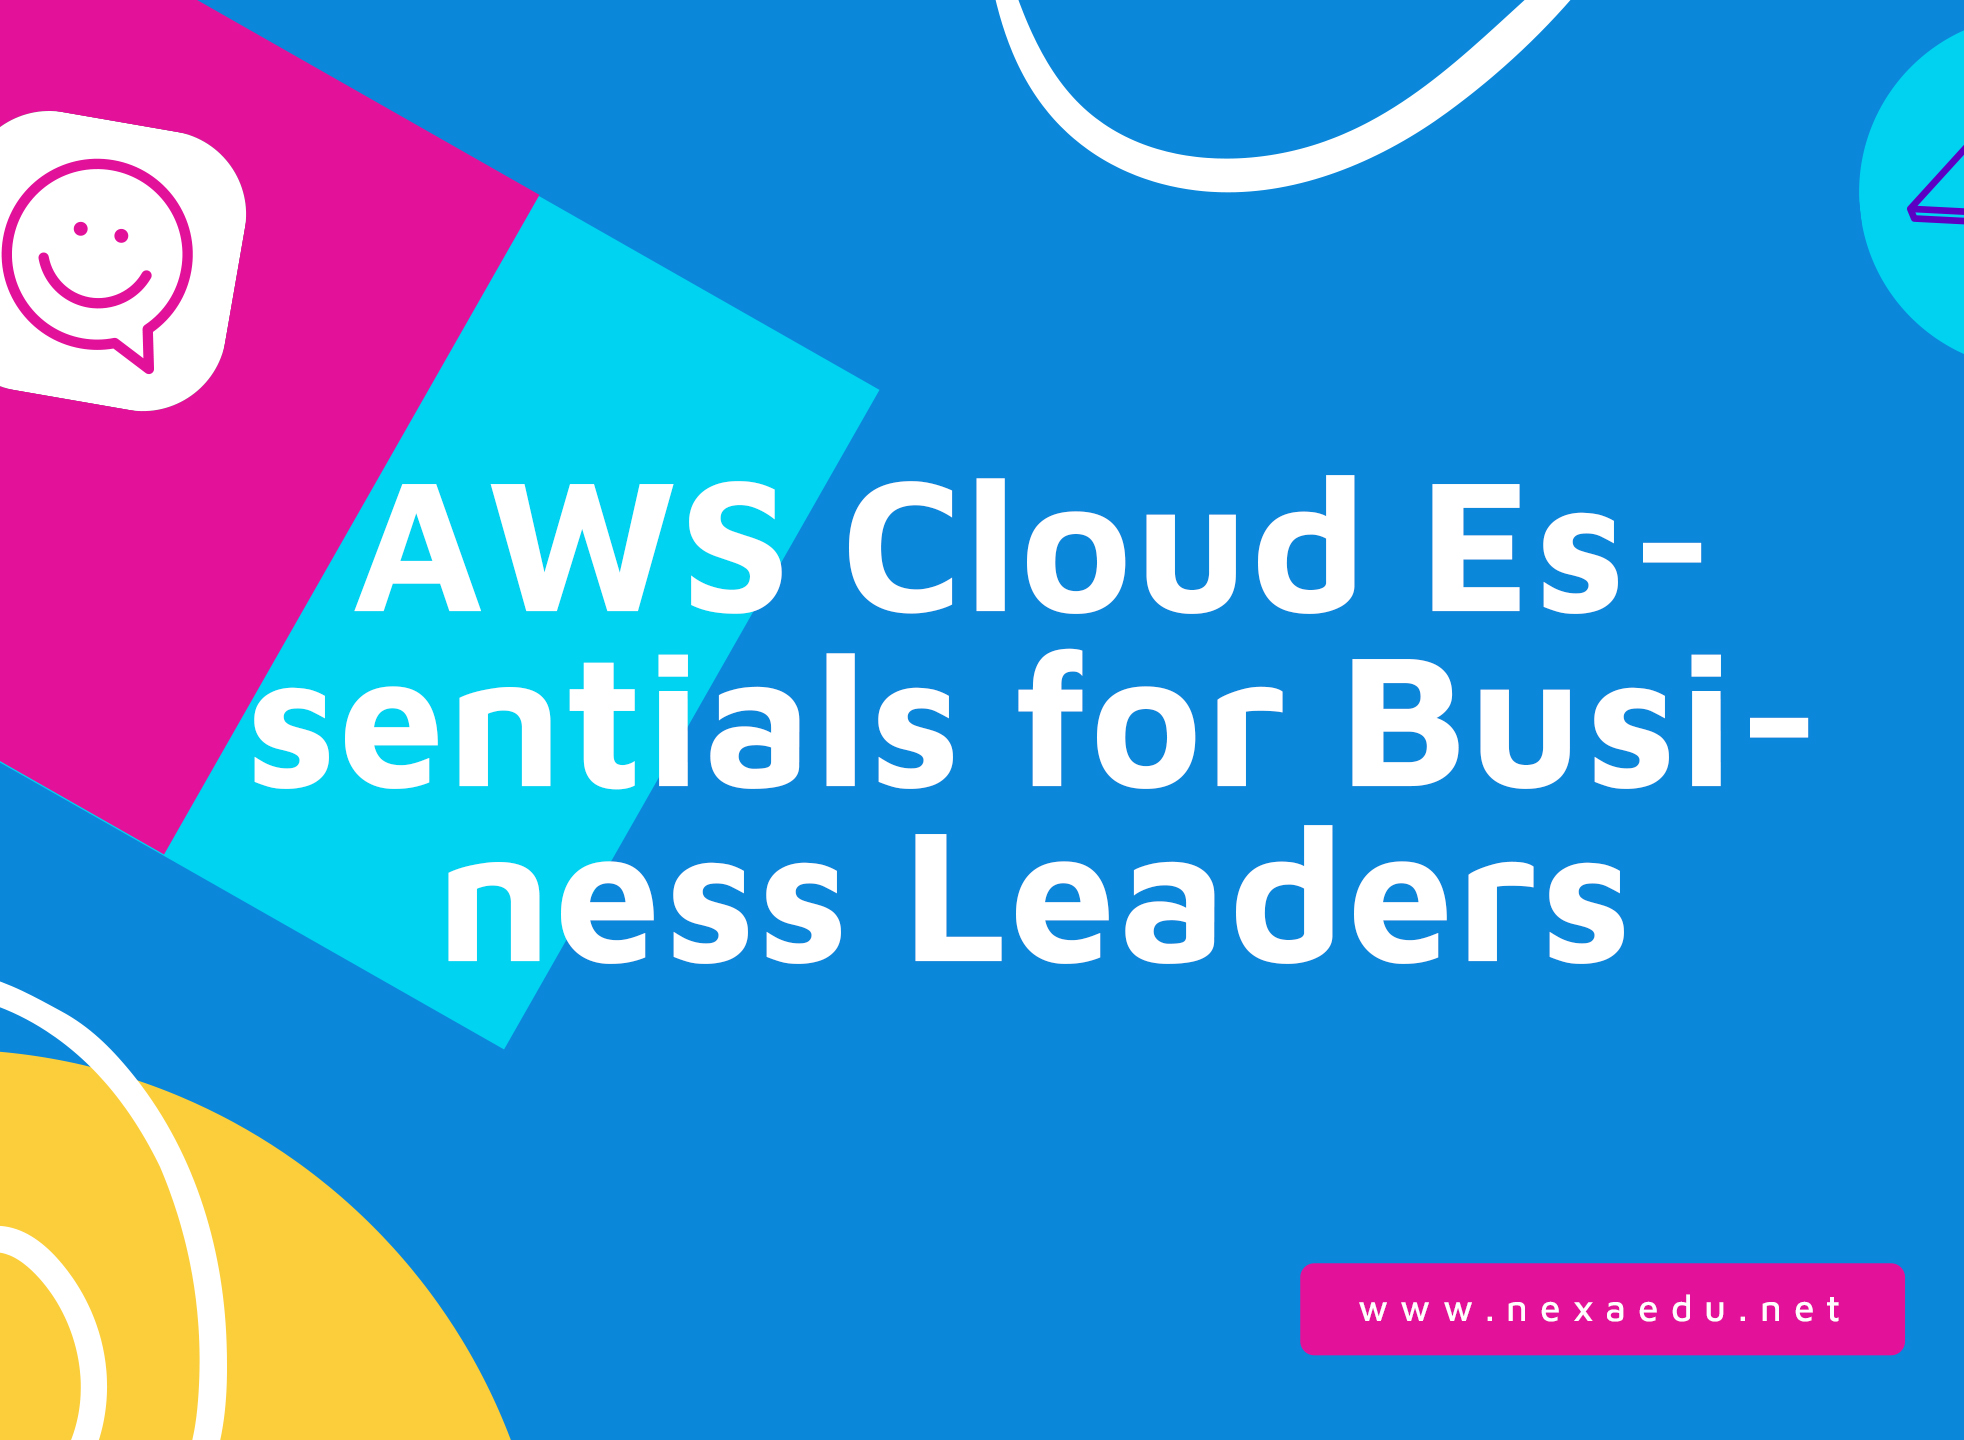 AWS Cloud Essentials for Business Leaders